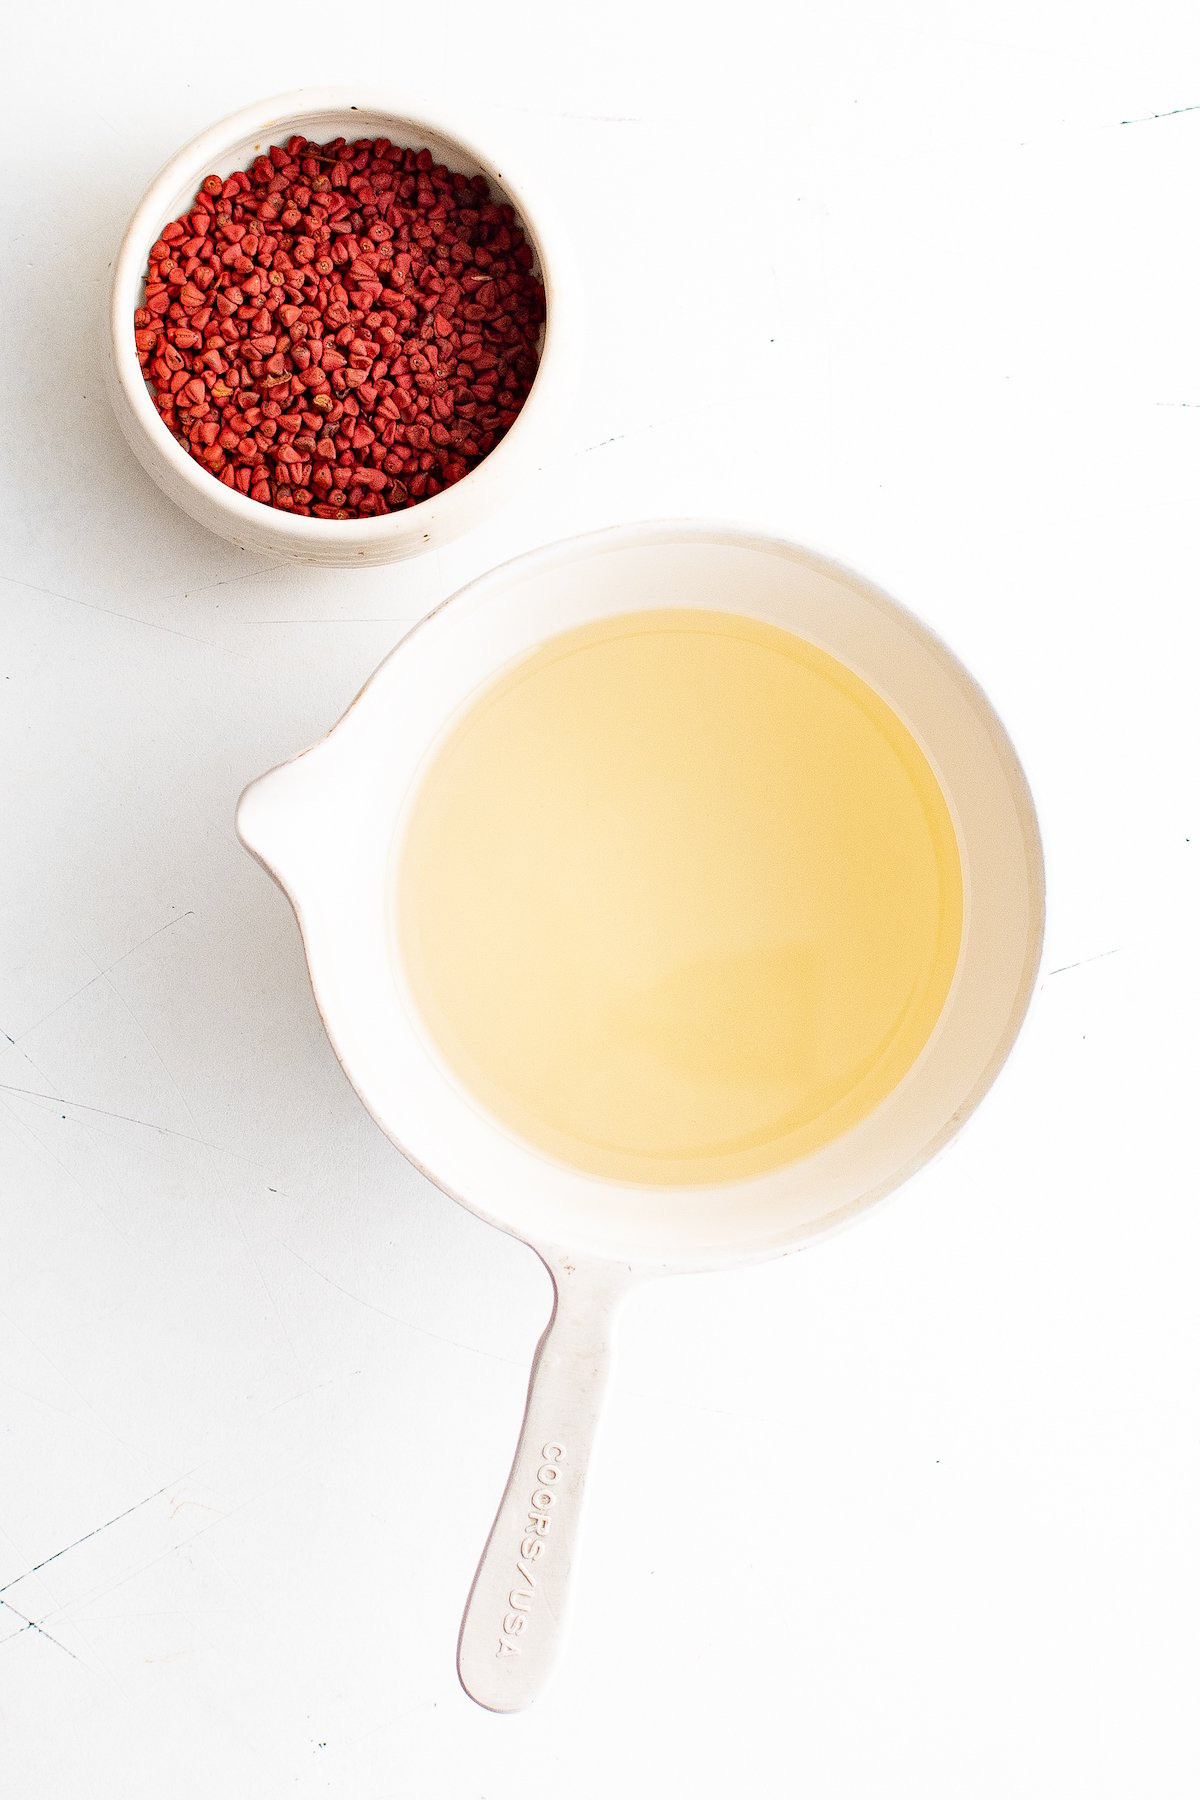 A dish of annatto seeds next to a measuring cup with oil in it.